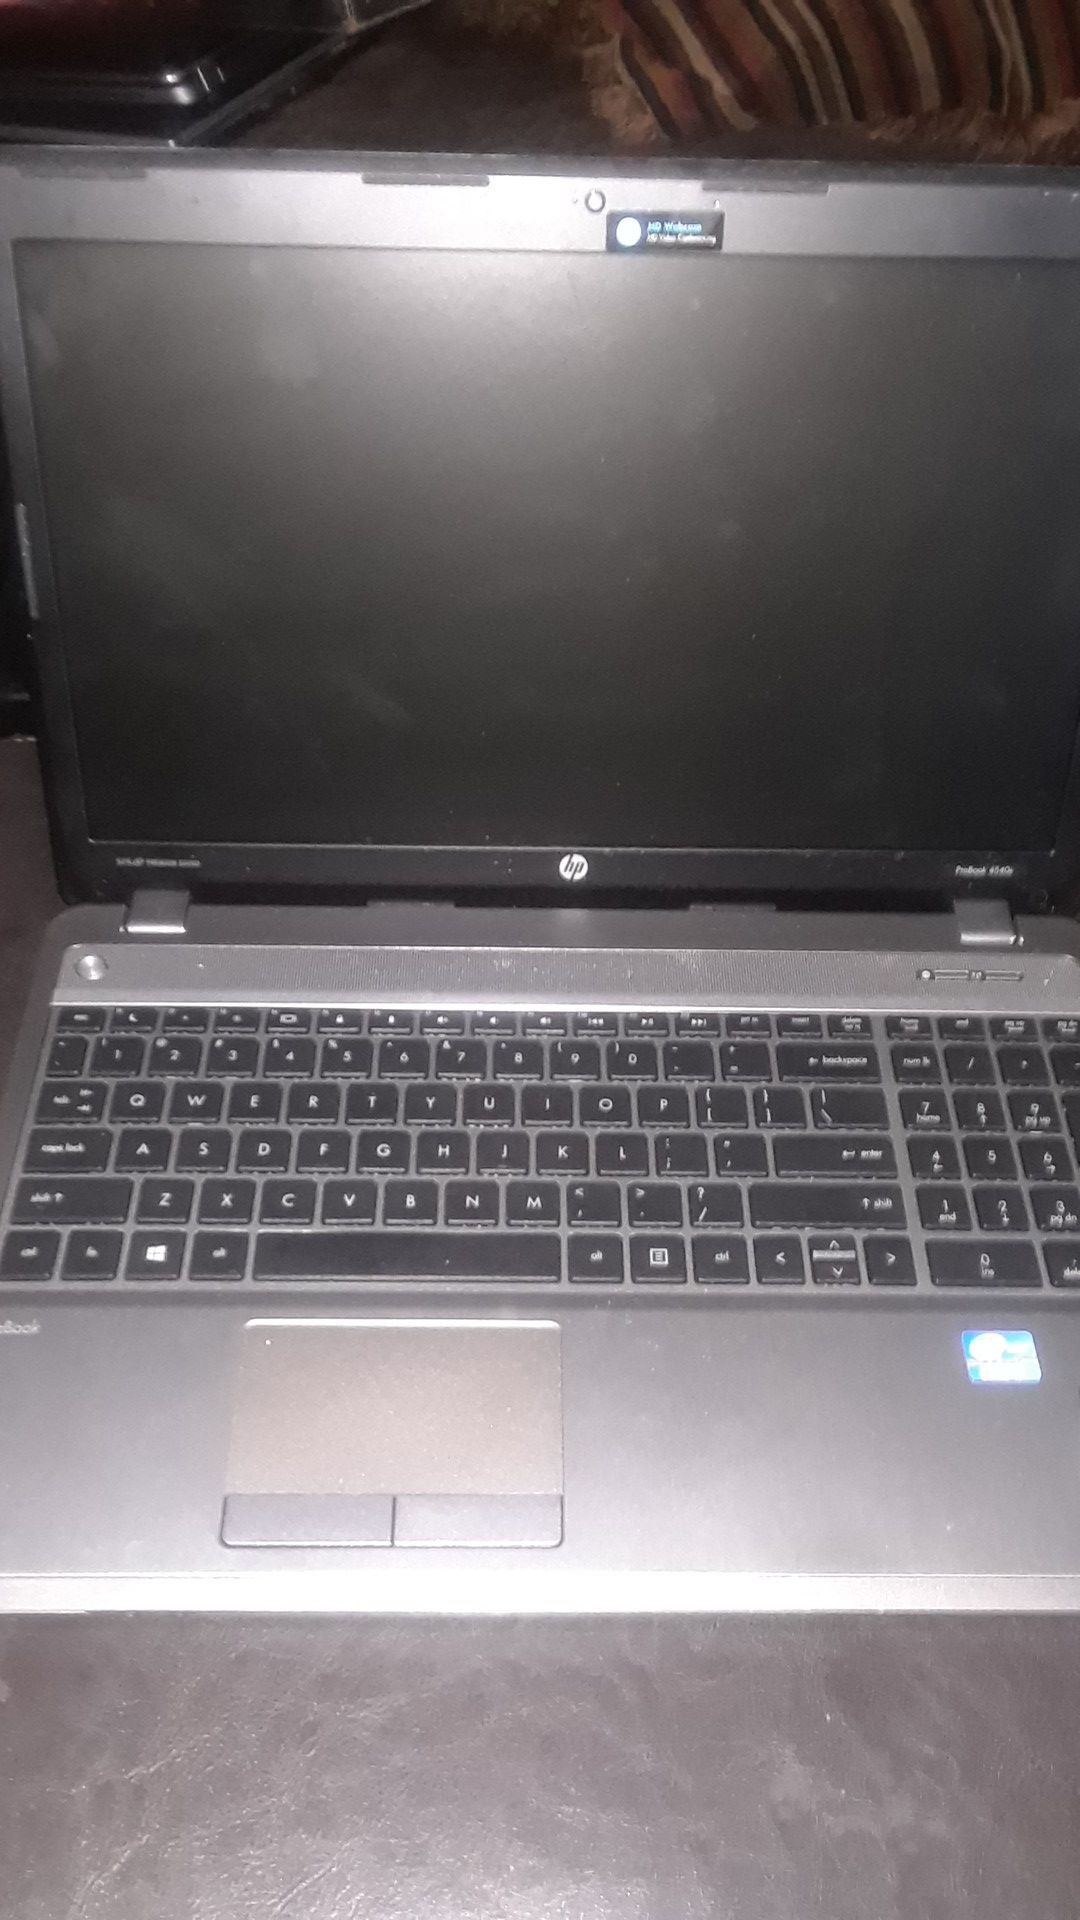 Loaded with windows 10 and comes with power cord $100obo